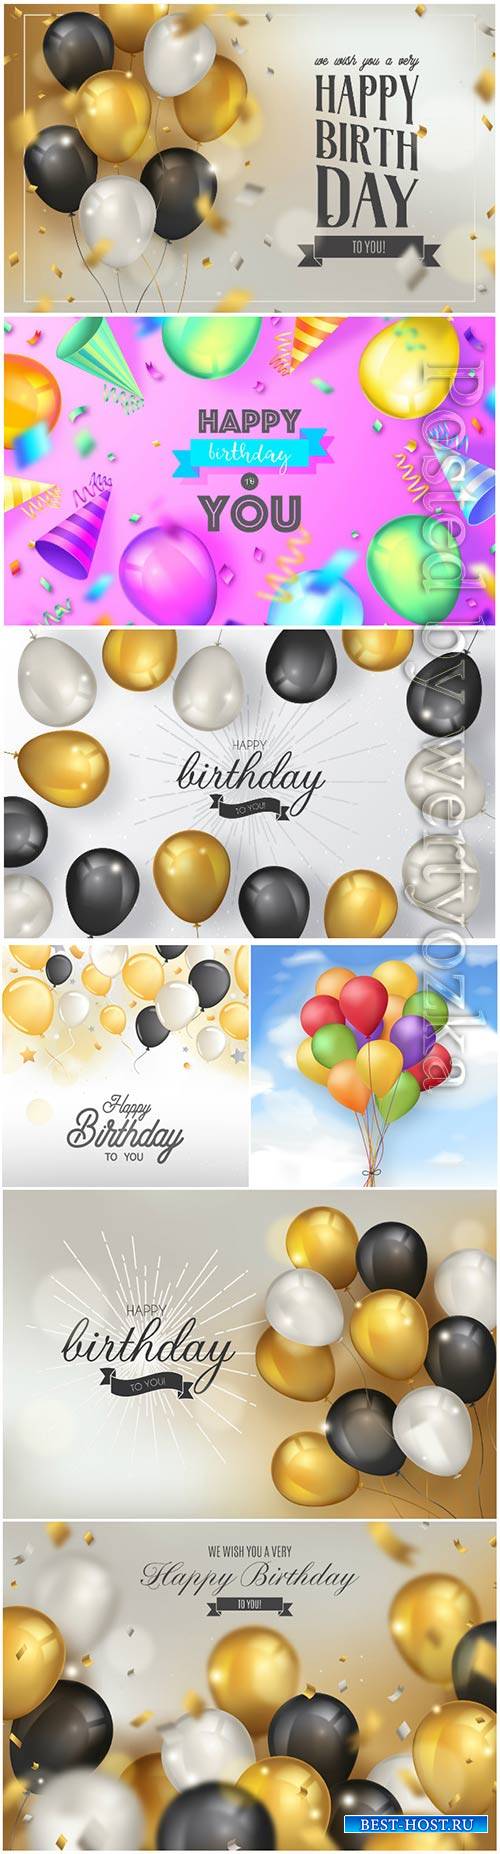 Elegant birthday vector background with realistic balloons